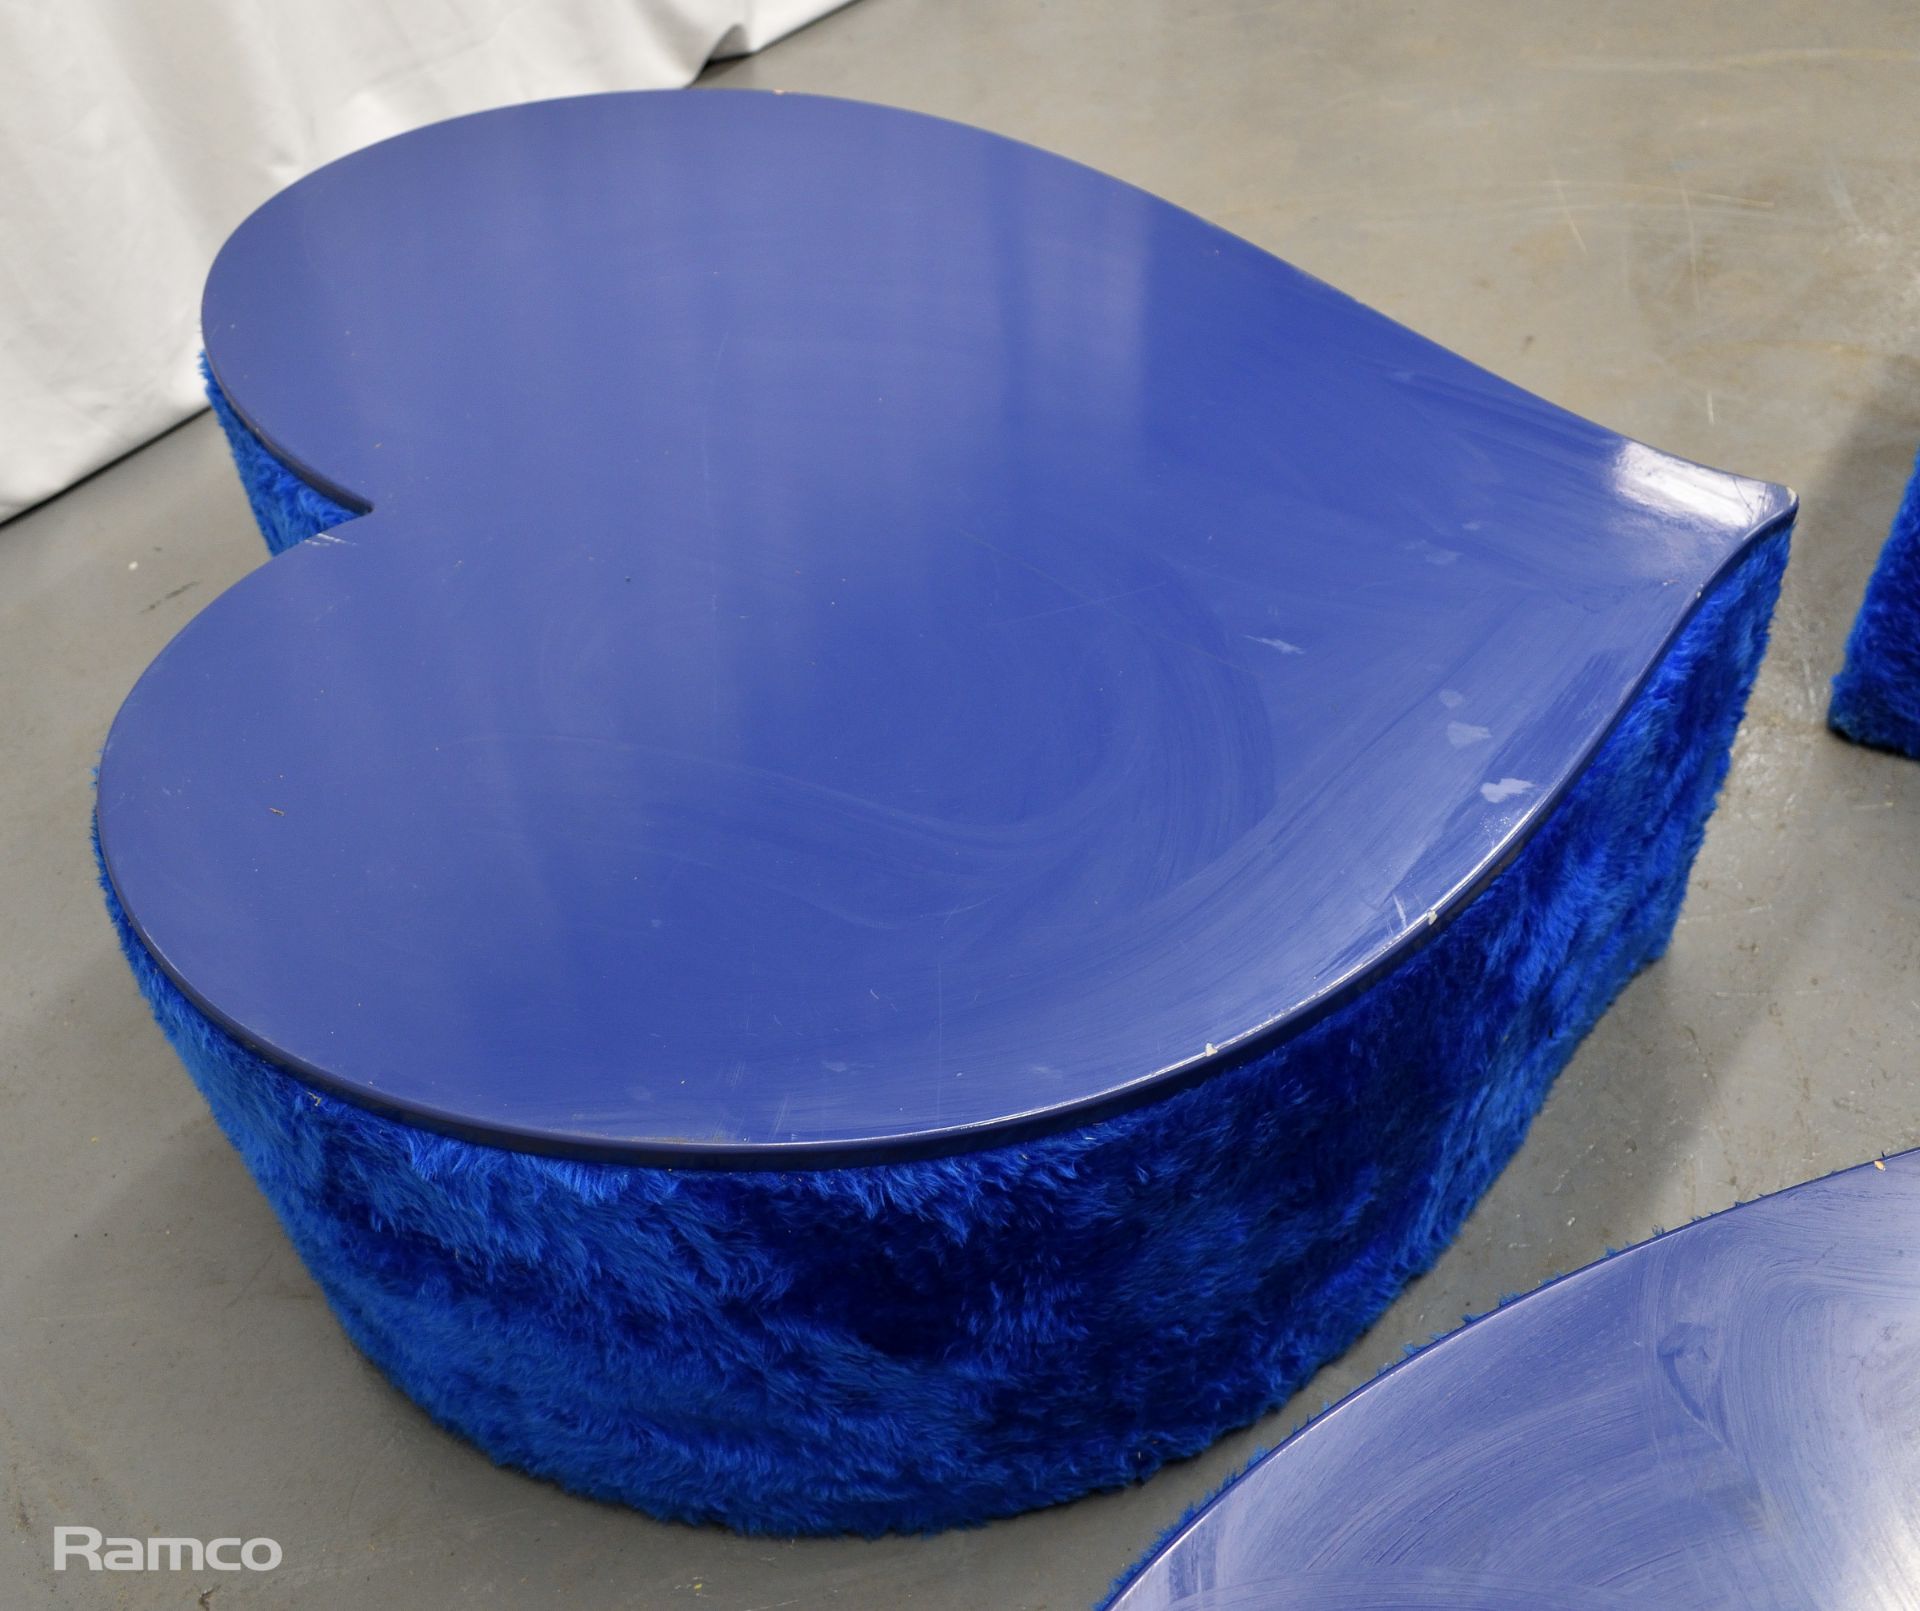 3x Asymmetrical heart shaped blue fur-covered wooden tables from countries' seating area - Image 12 of 13